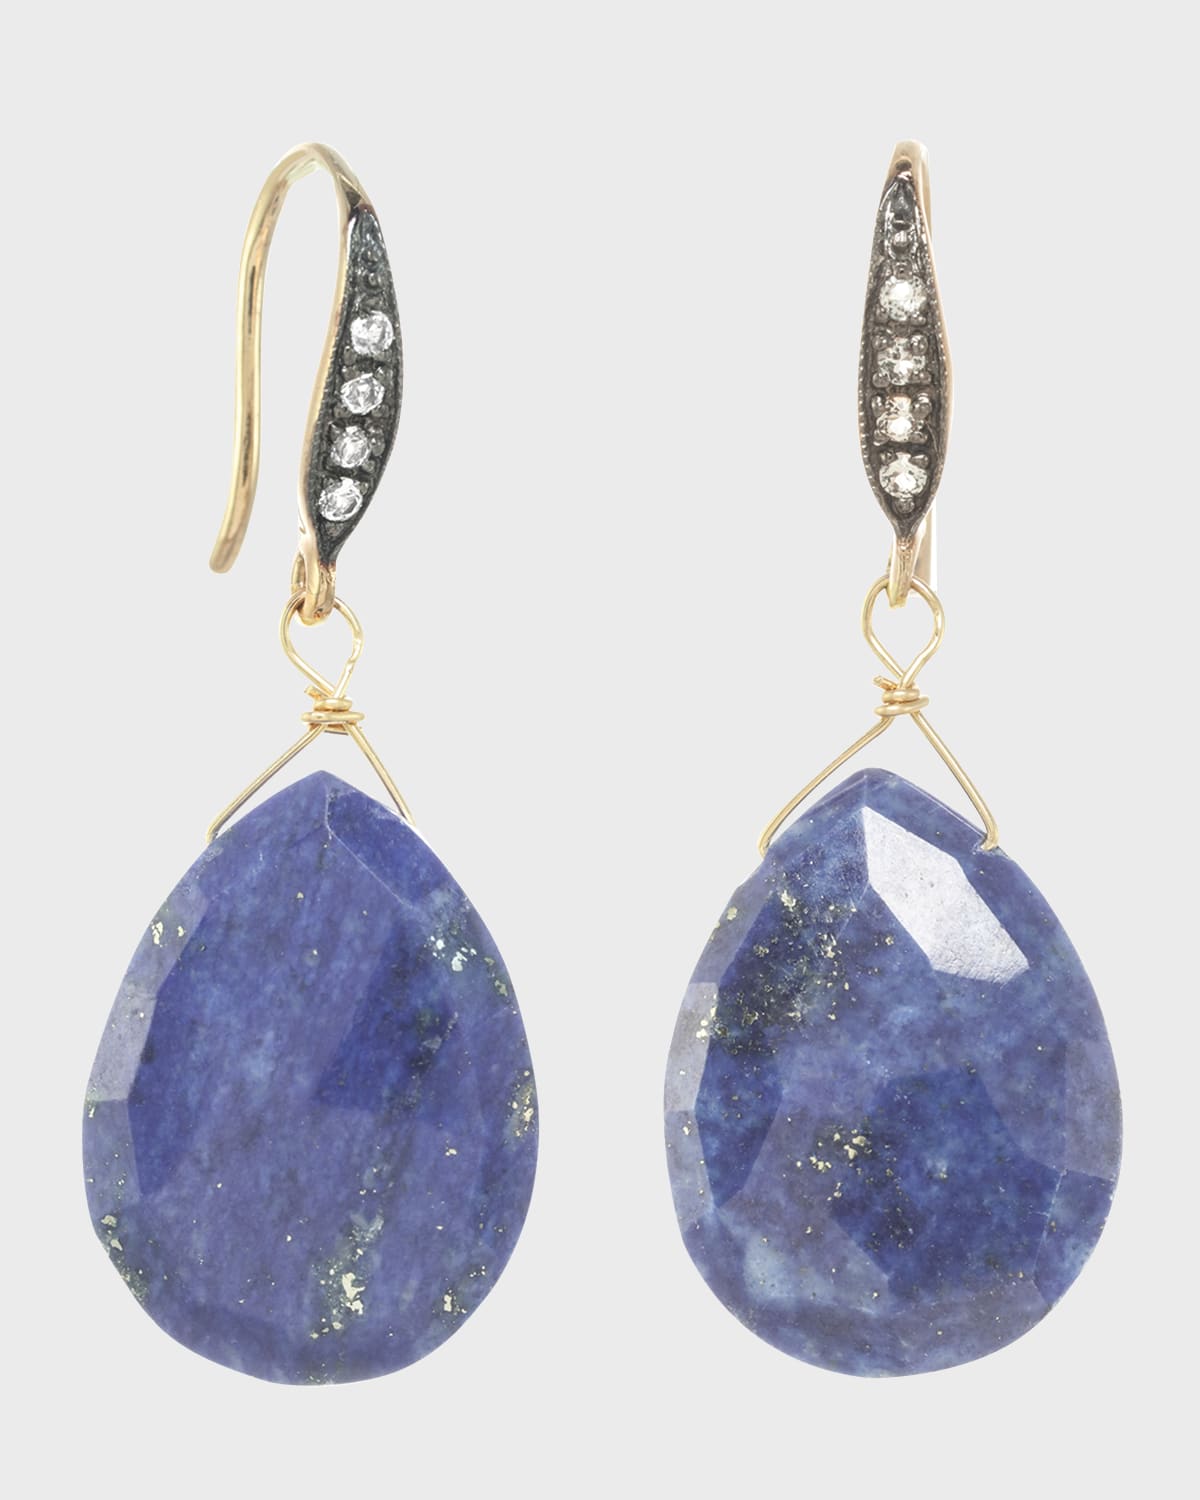 Margo Morrison Grey Baroque Earrings With White Sapphires On A Vermeil Top In Blue Lapis